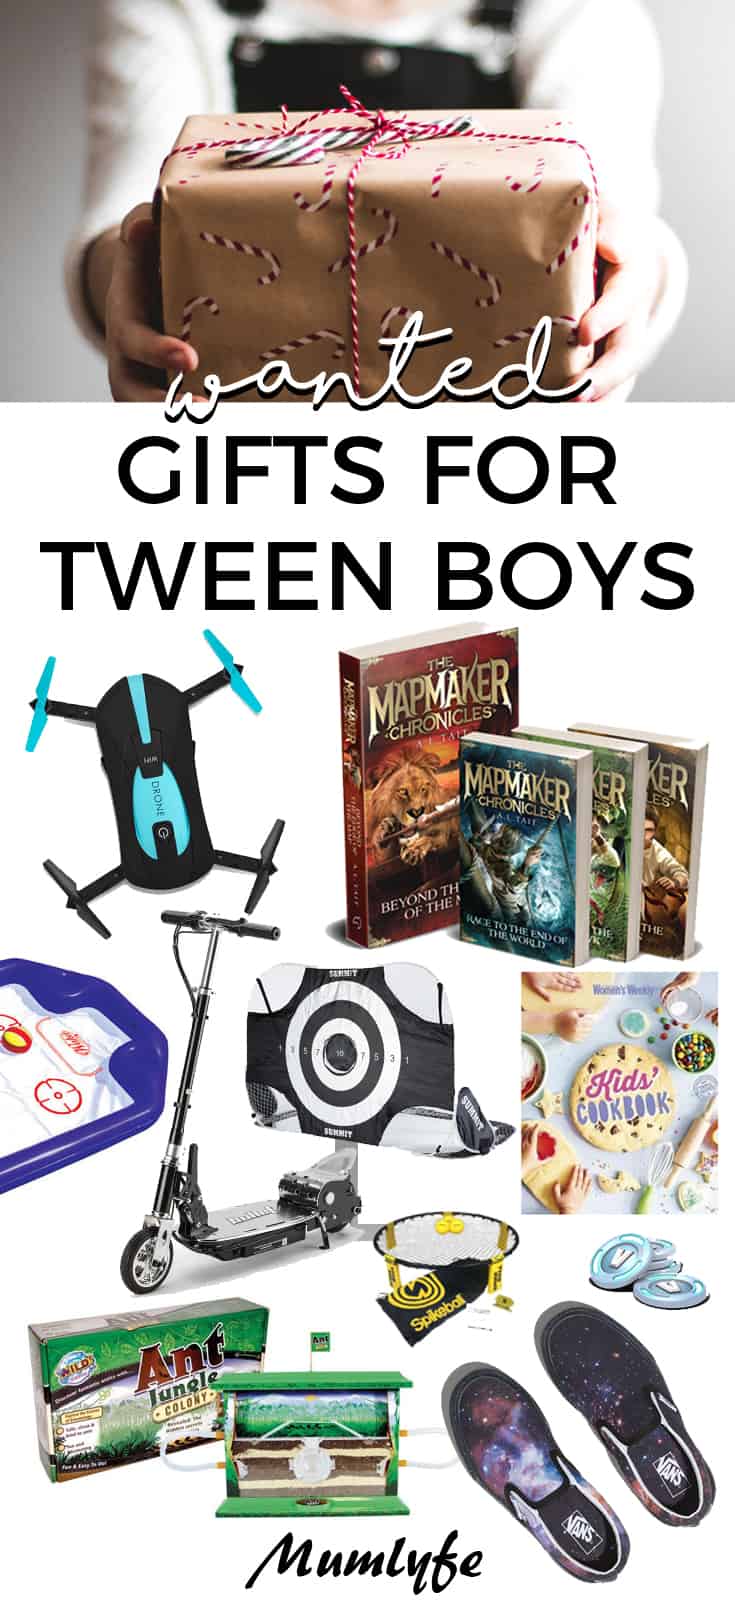 Gift ideas for tween boys - best ideas for gifts for boys